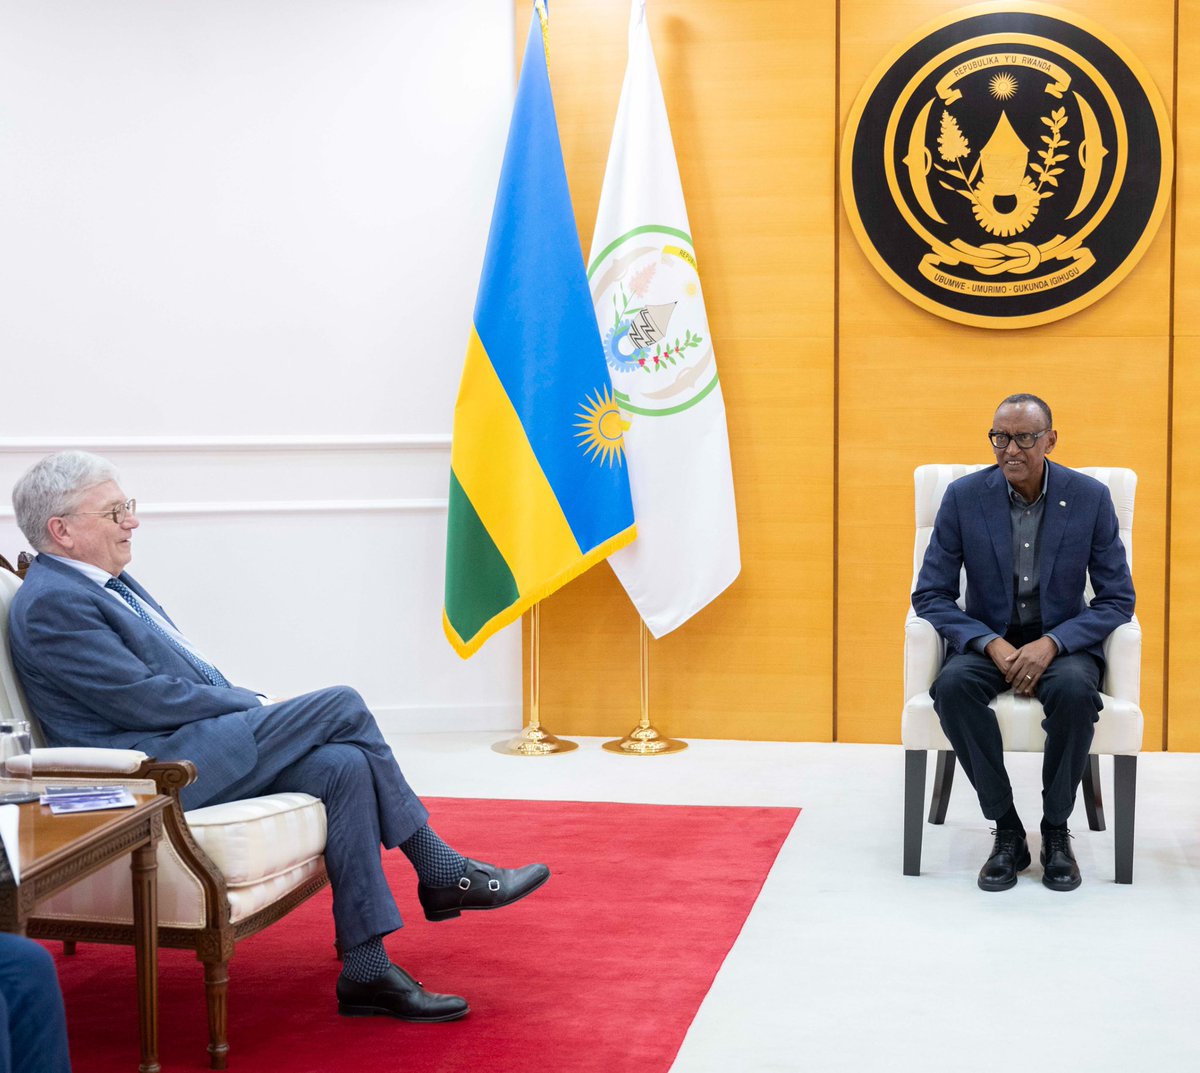 This afternoon at Urugwiro Village, President Kagame received Prof. Romain Murenzi, Professor at Worcester Polytechnic Institute and Prof. Remi Quirion, Chief Scientist of Quebec for discussions on expanding science advice for governments as the International Network for…